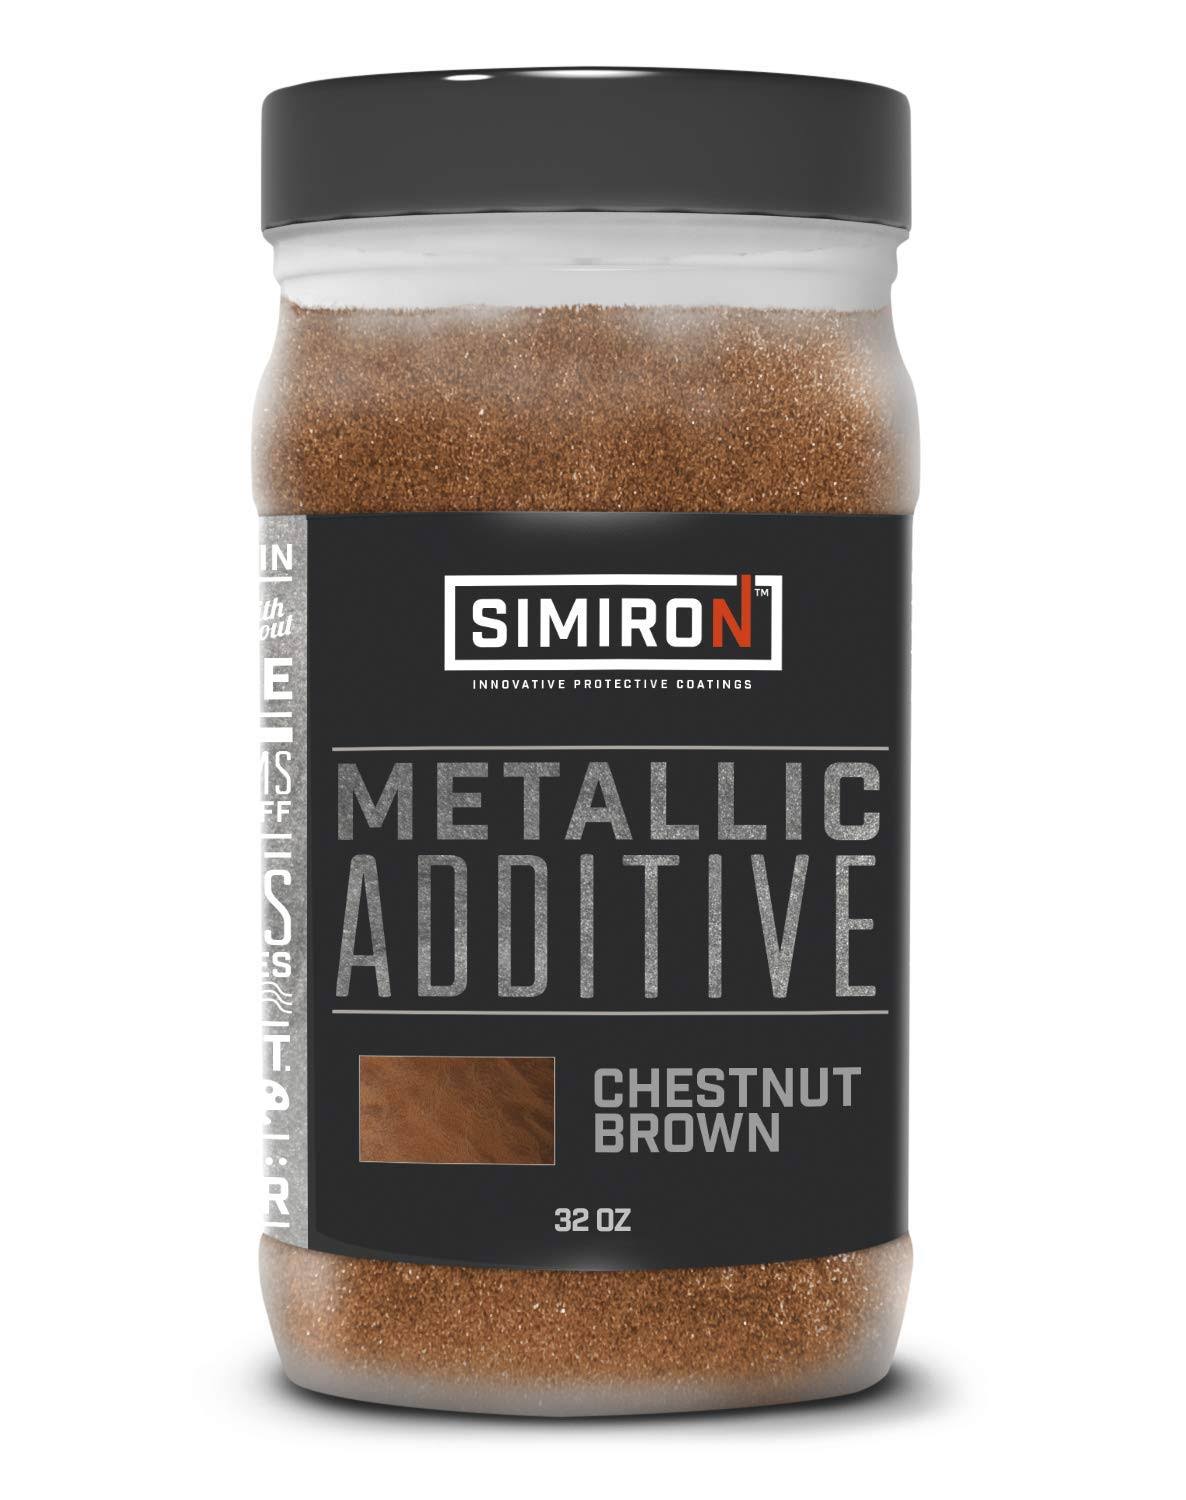 SIMIRON 32 oz. Chestnut Brown Metallic Paint and Epoxy Additive for 3 gal. Mix 40003319